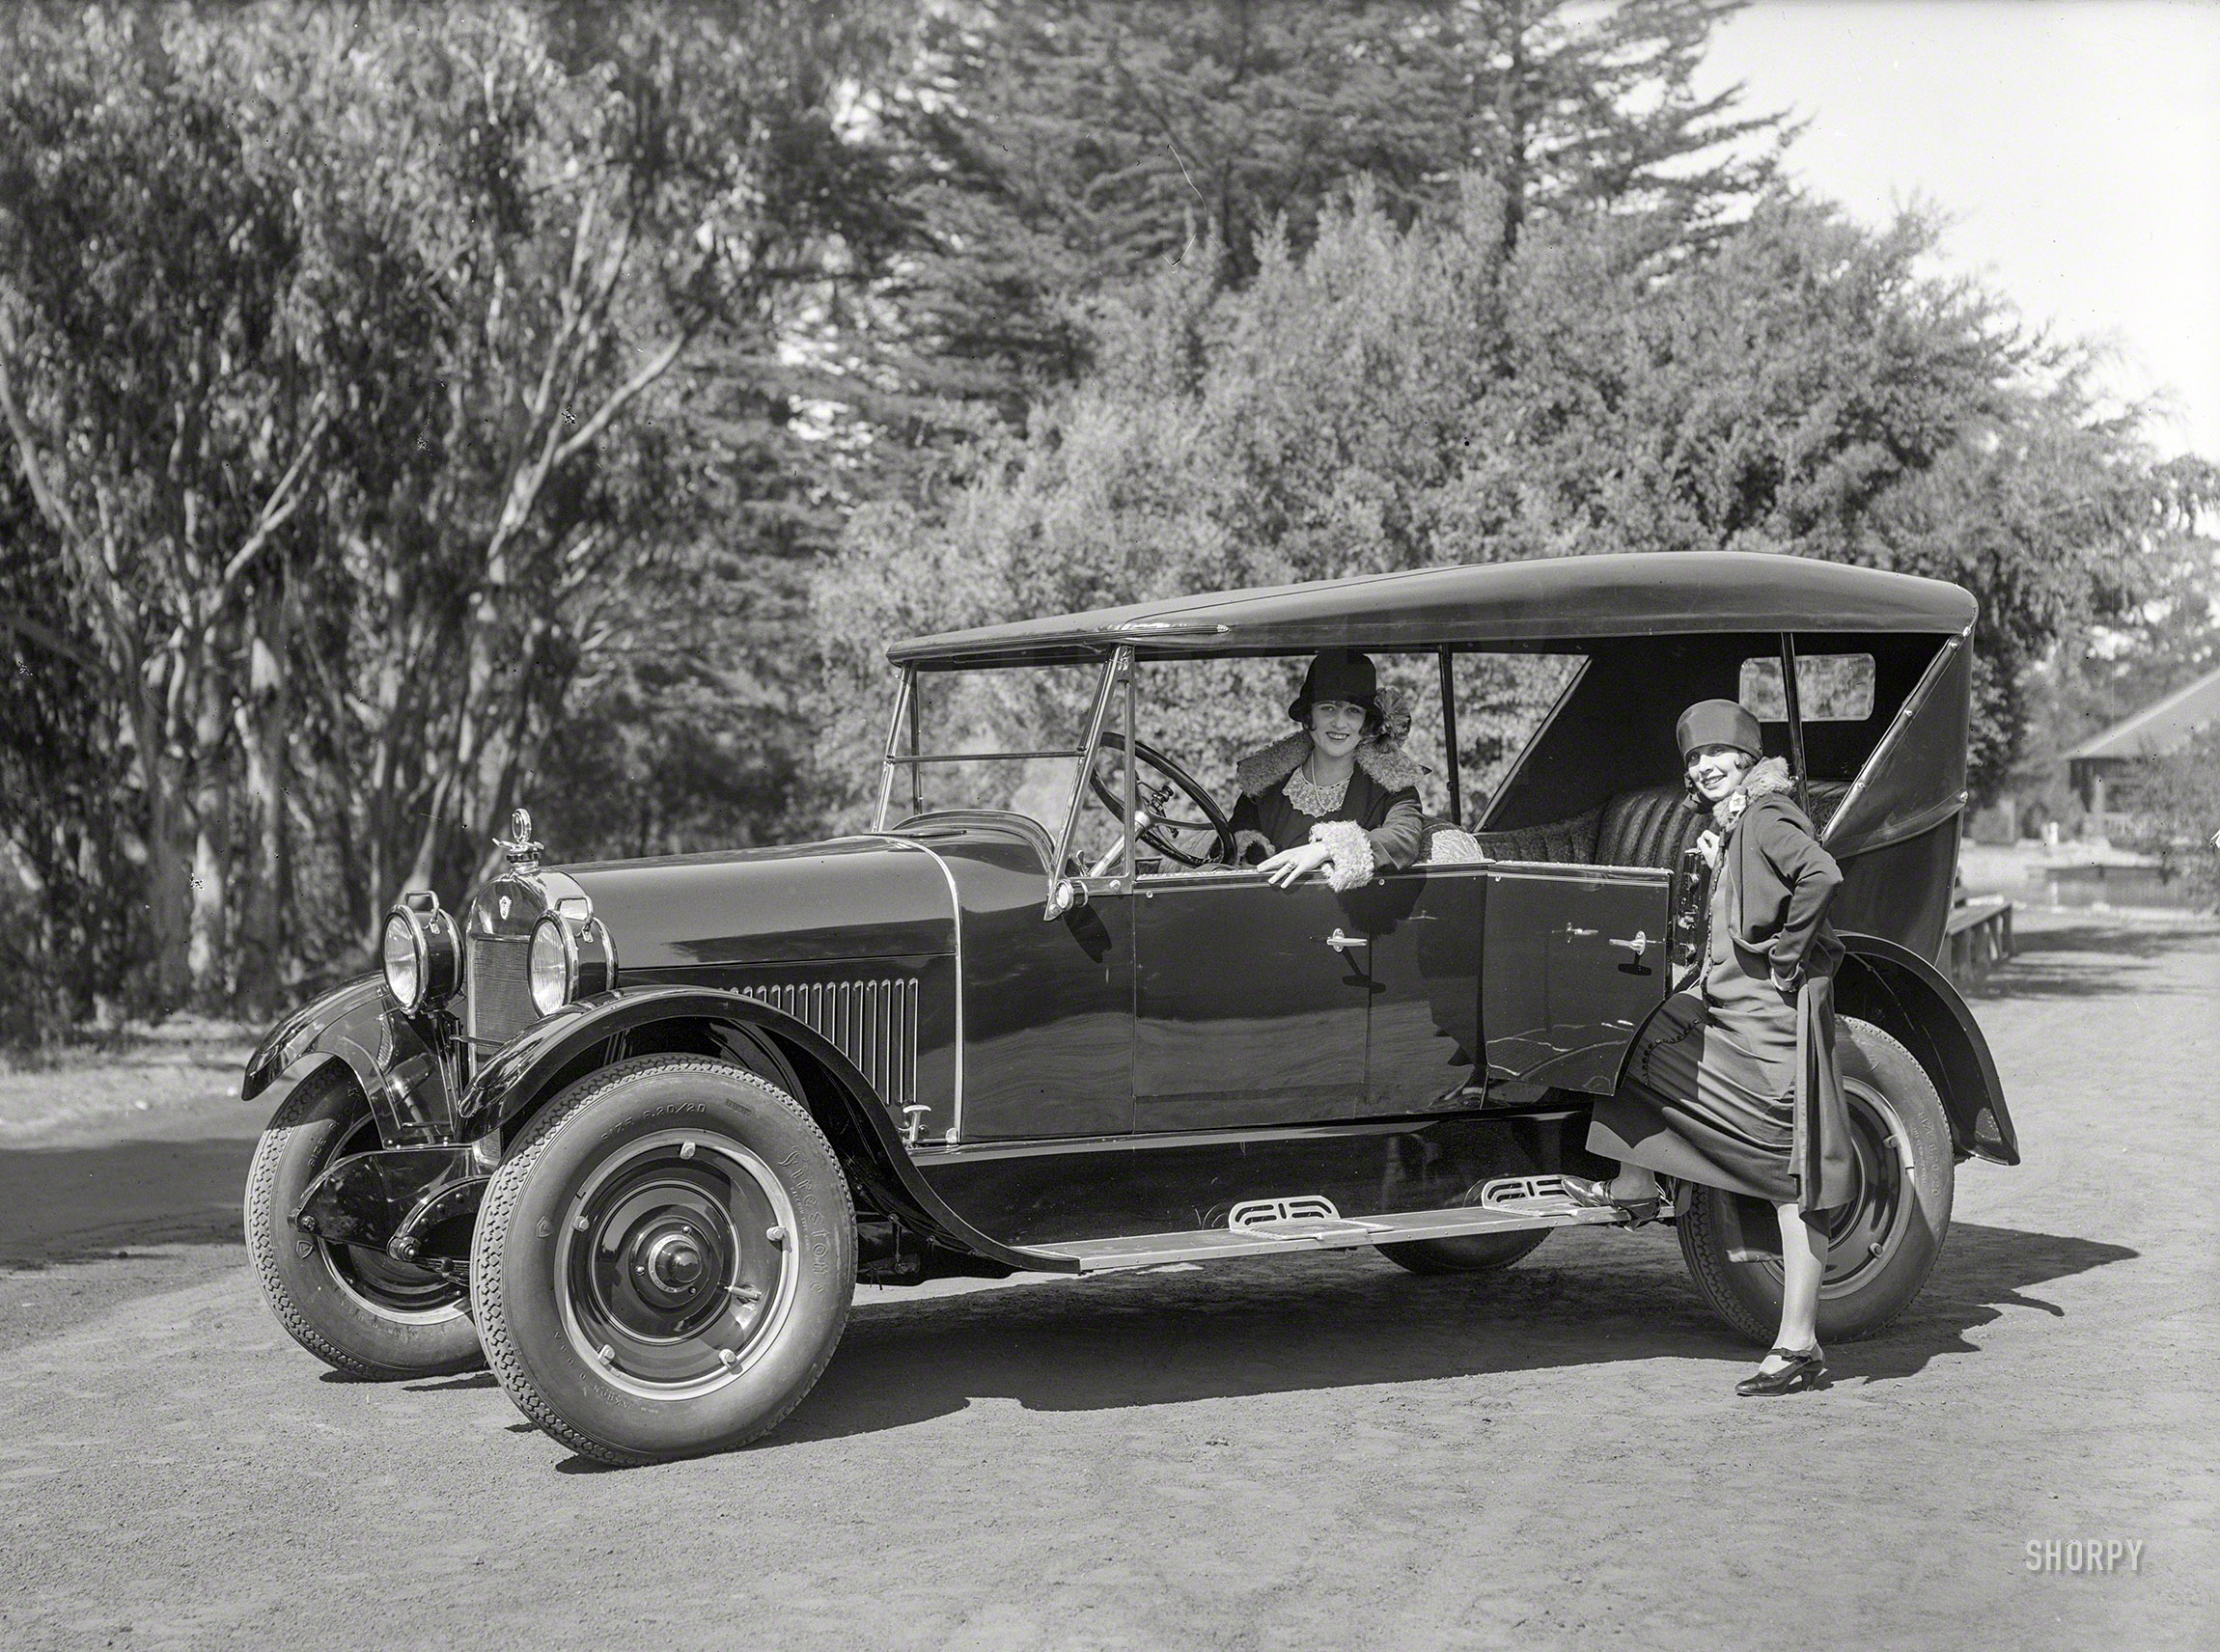 San Francisco circa 1925. "REO touring car at Golden Gate Park." Ready to carry these ladies in style. 5x7 glass negative by Christopher Helin. View full size.